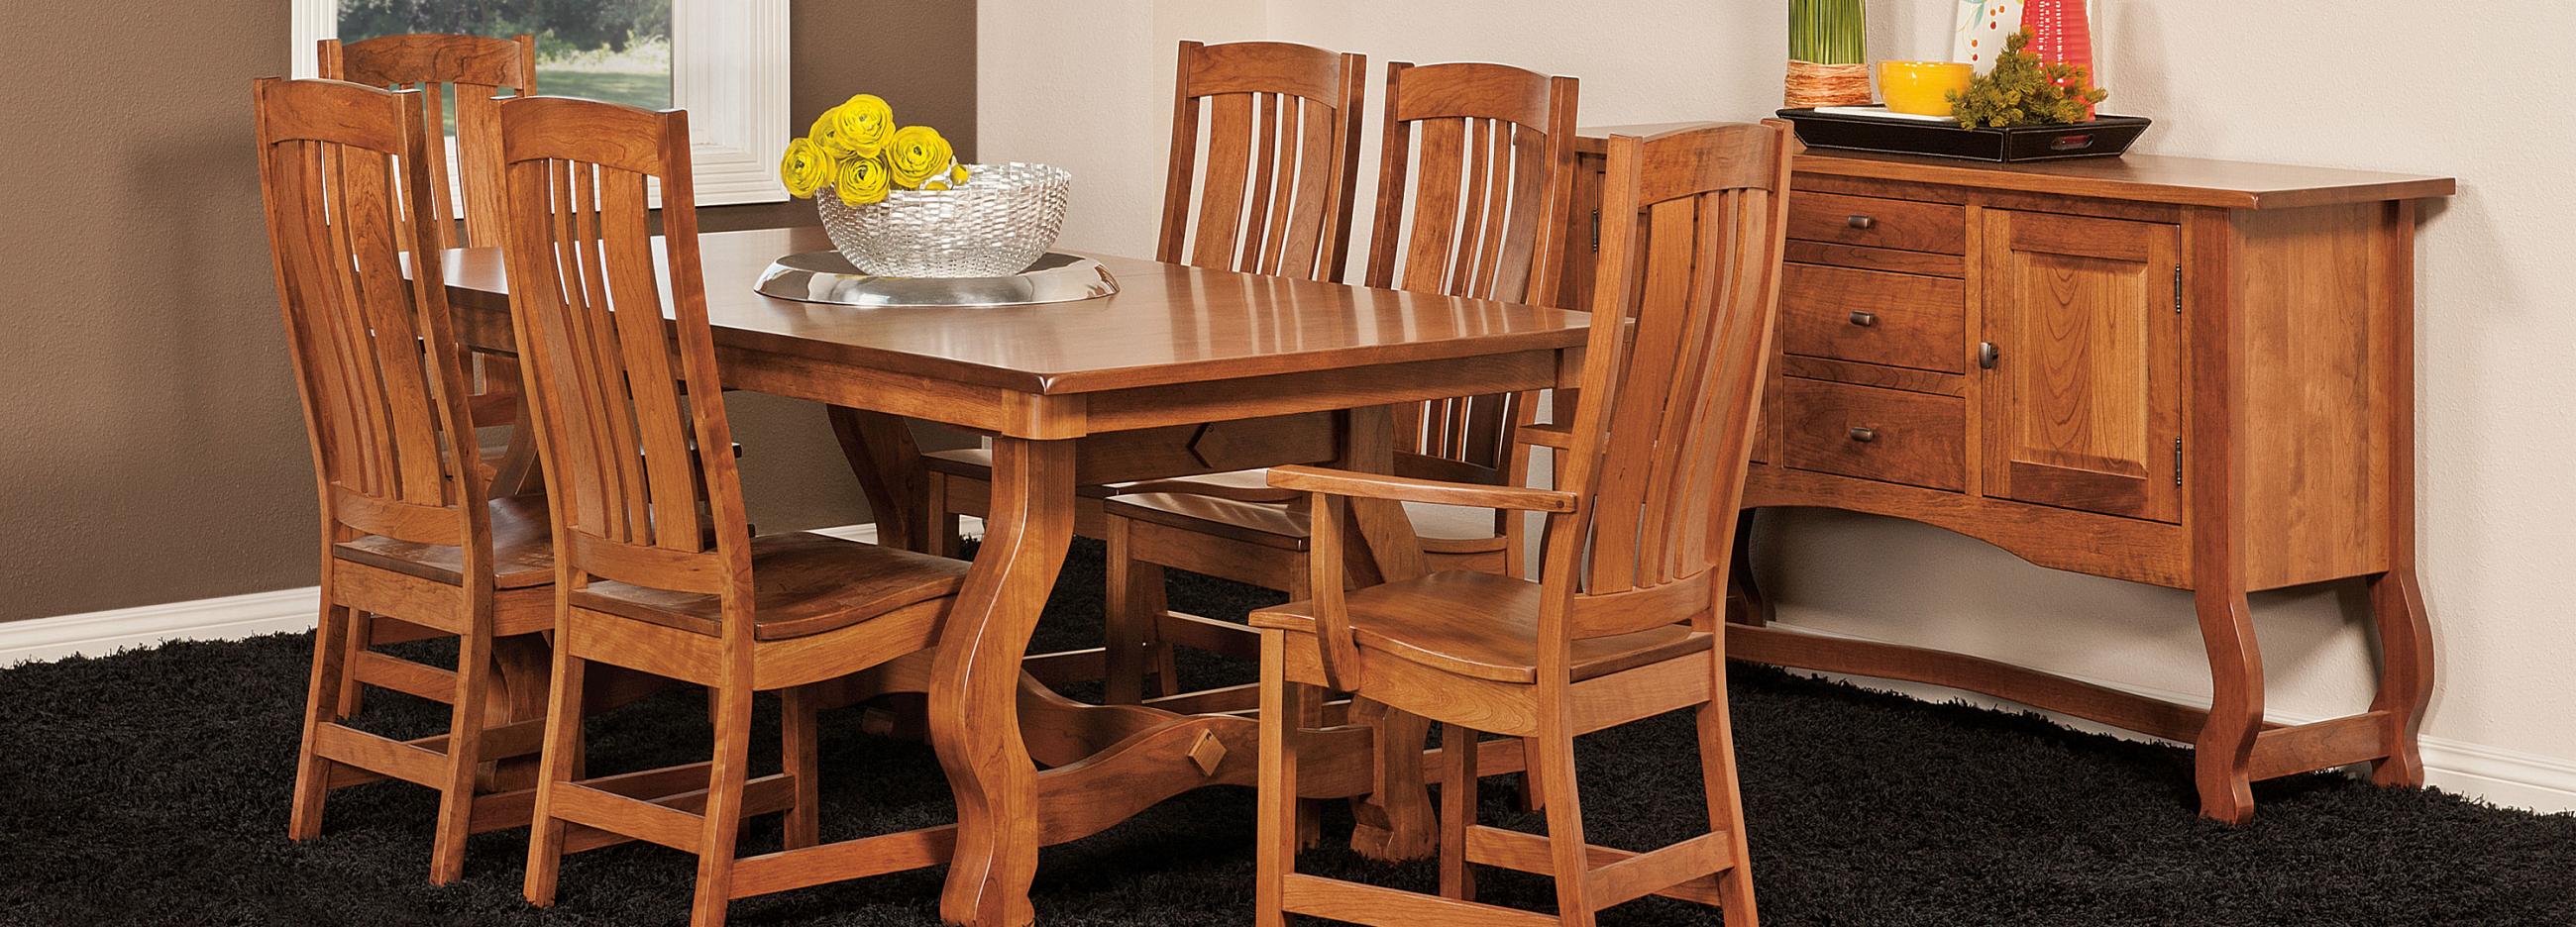 Northern Woodcraft Products Dining Room Furniture